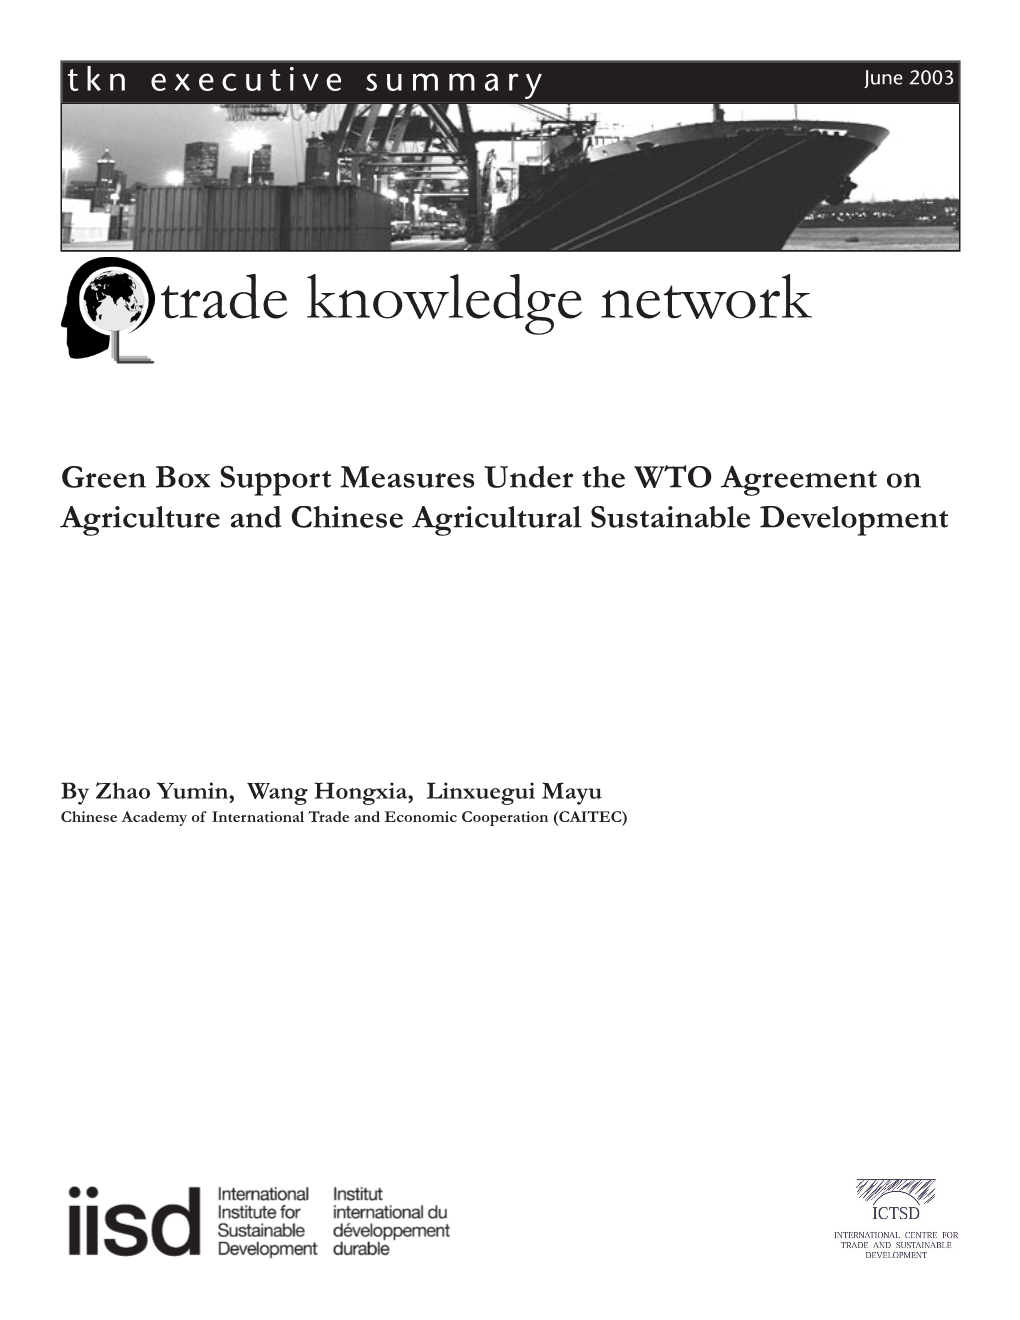 Green Box Support Measures Under the WTO Agreement on Agriculture and Chinese Agricultural Sustainable Development